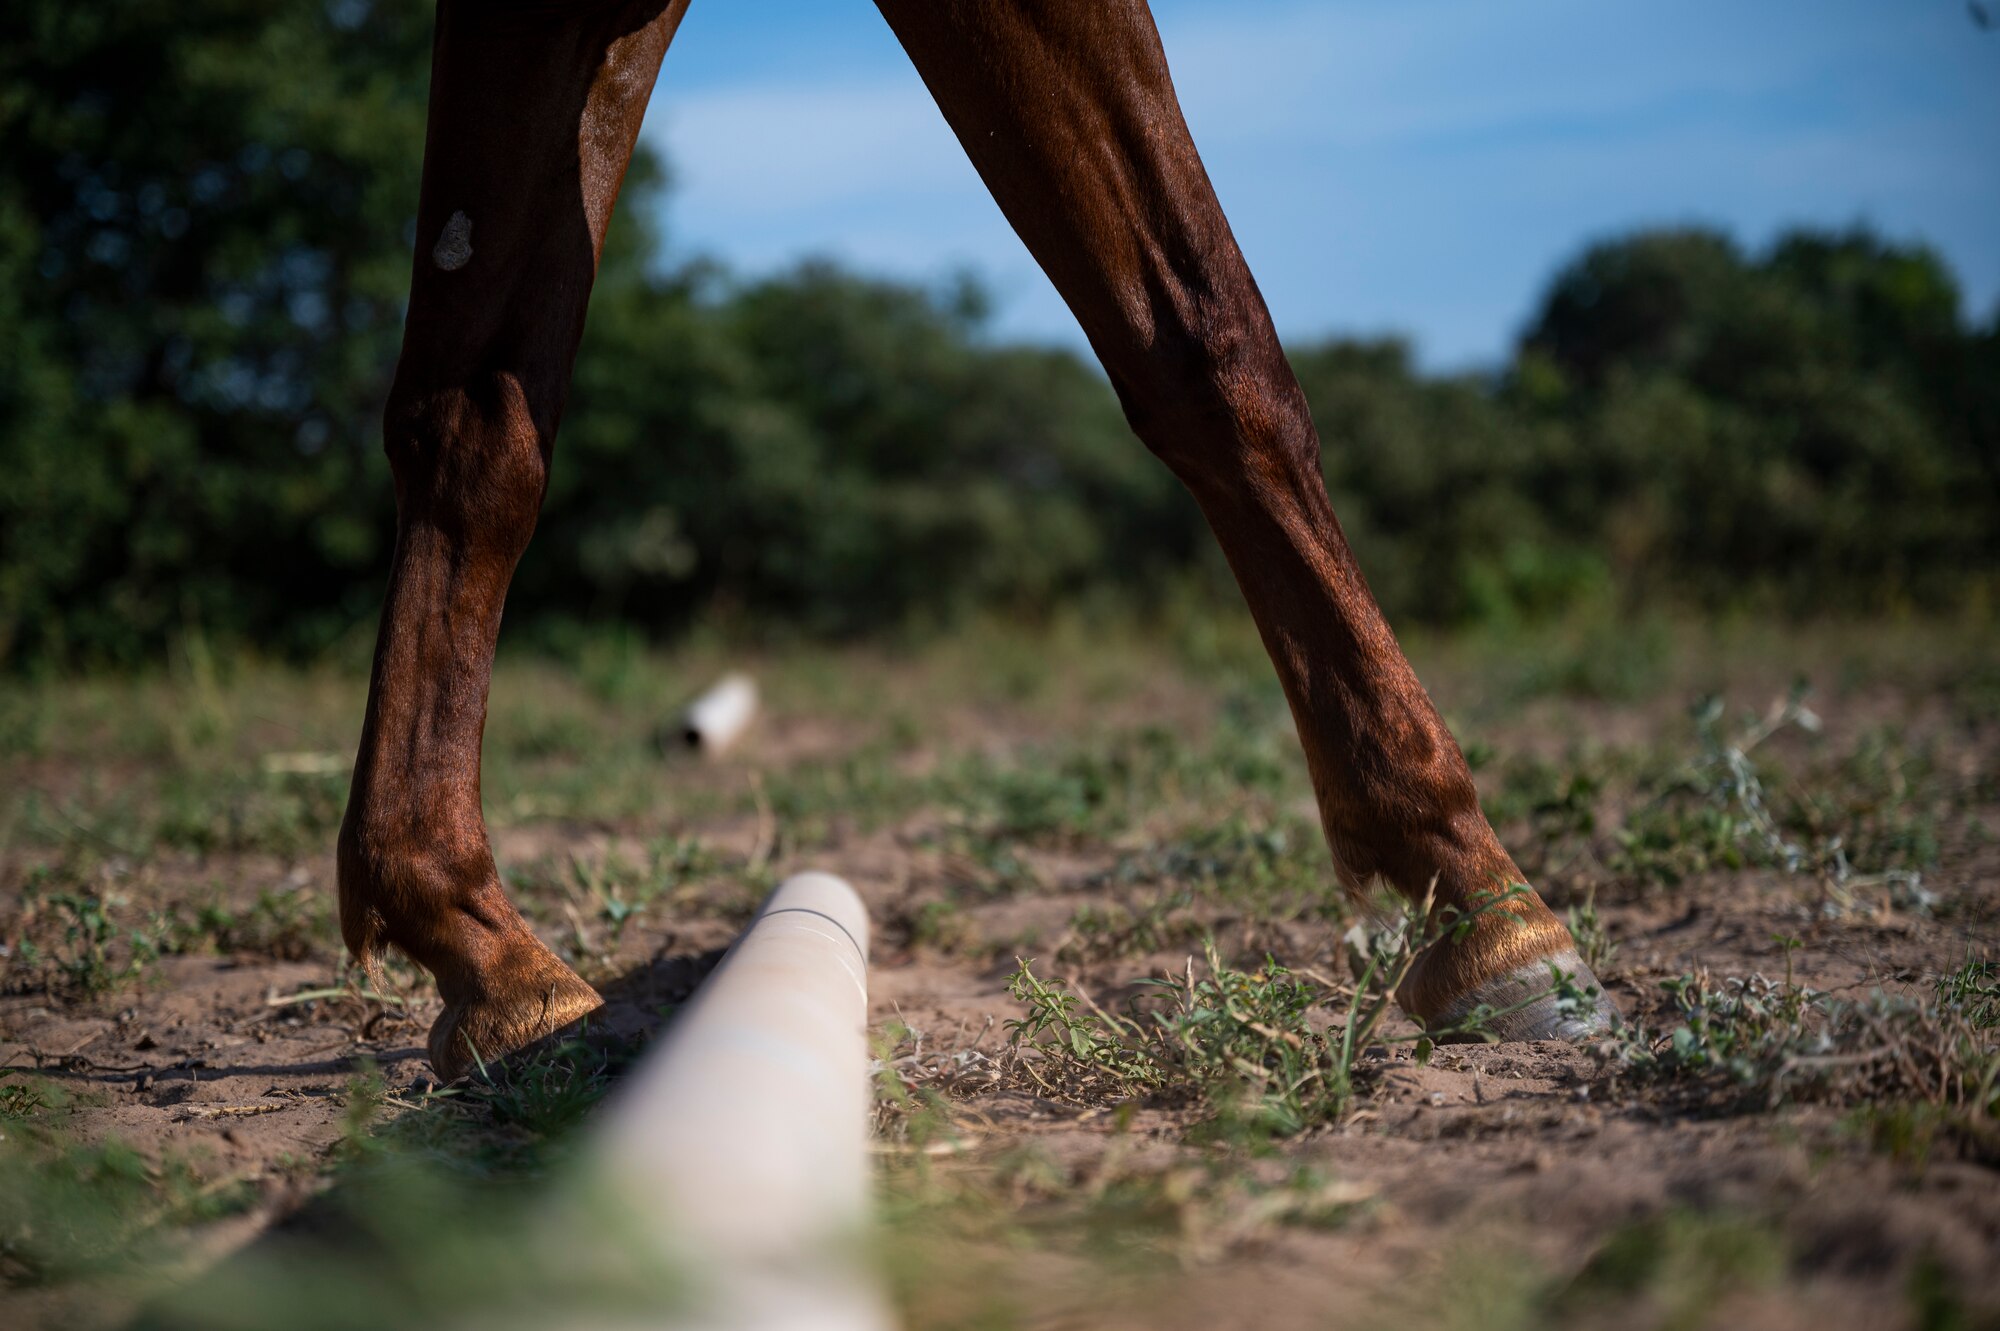 Malibu, a wild mustang in training, is led over a ground pole by Staff Sgt. Melissa Sekerak, 7th Munitions Squadron stockpile management supervisor, in Hawley, Texas, July 27, 2021.